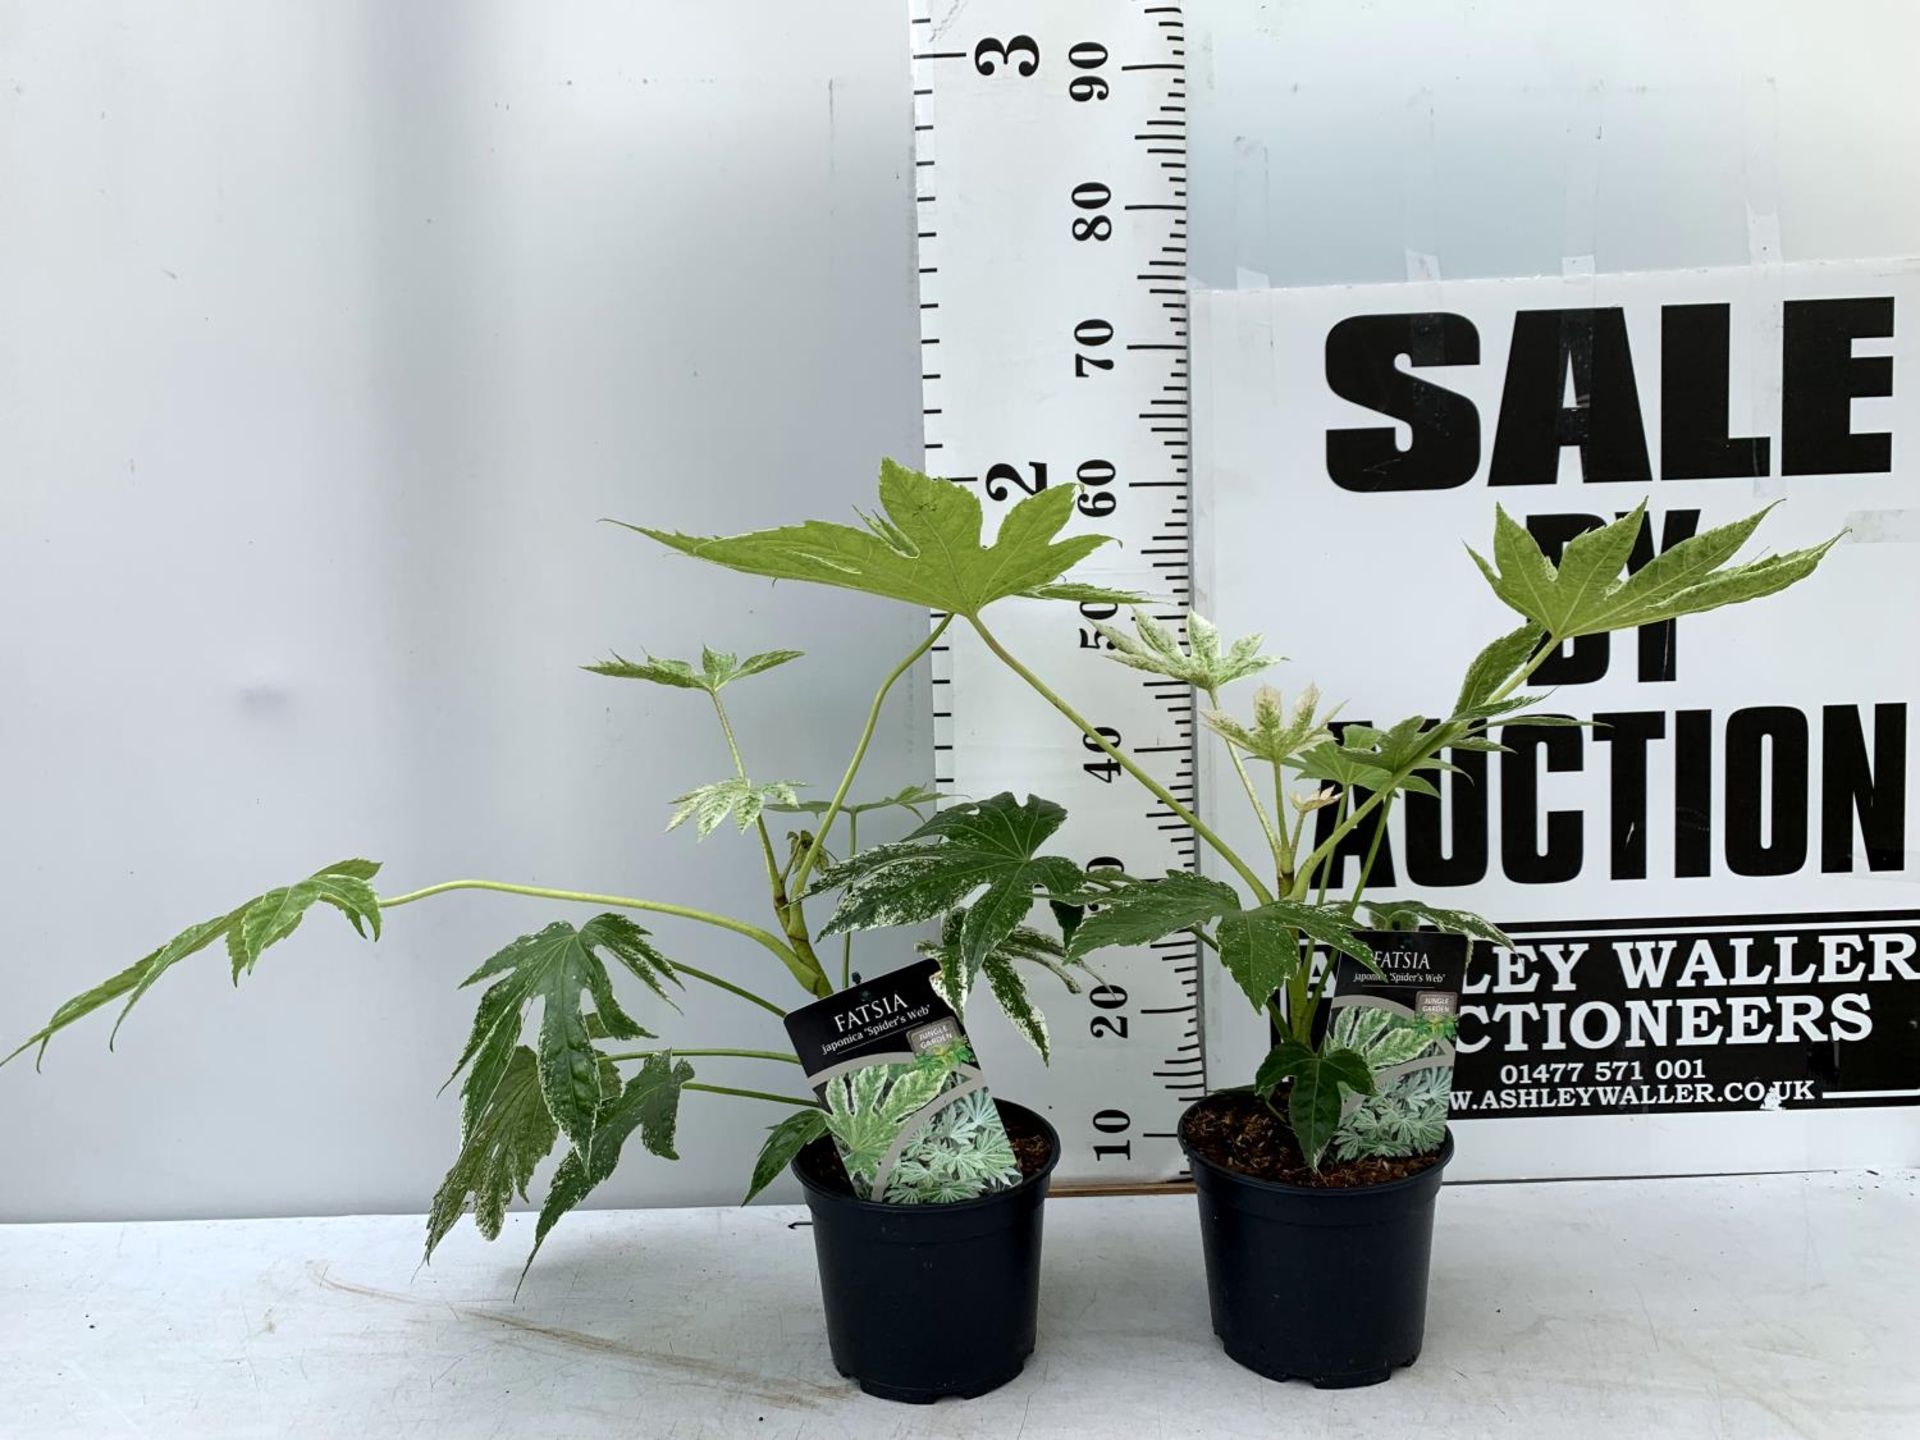 TWO FATSIA JAPONICA 'SPIDERS WEB' IN 2 LTR POTS 60CM TALL PLUS VAT TO BE SOLD FOR THE TWO